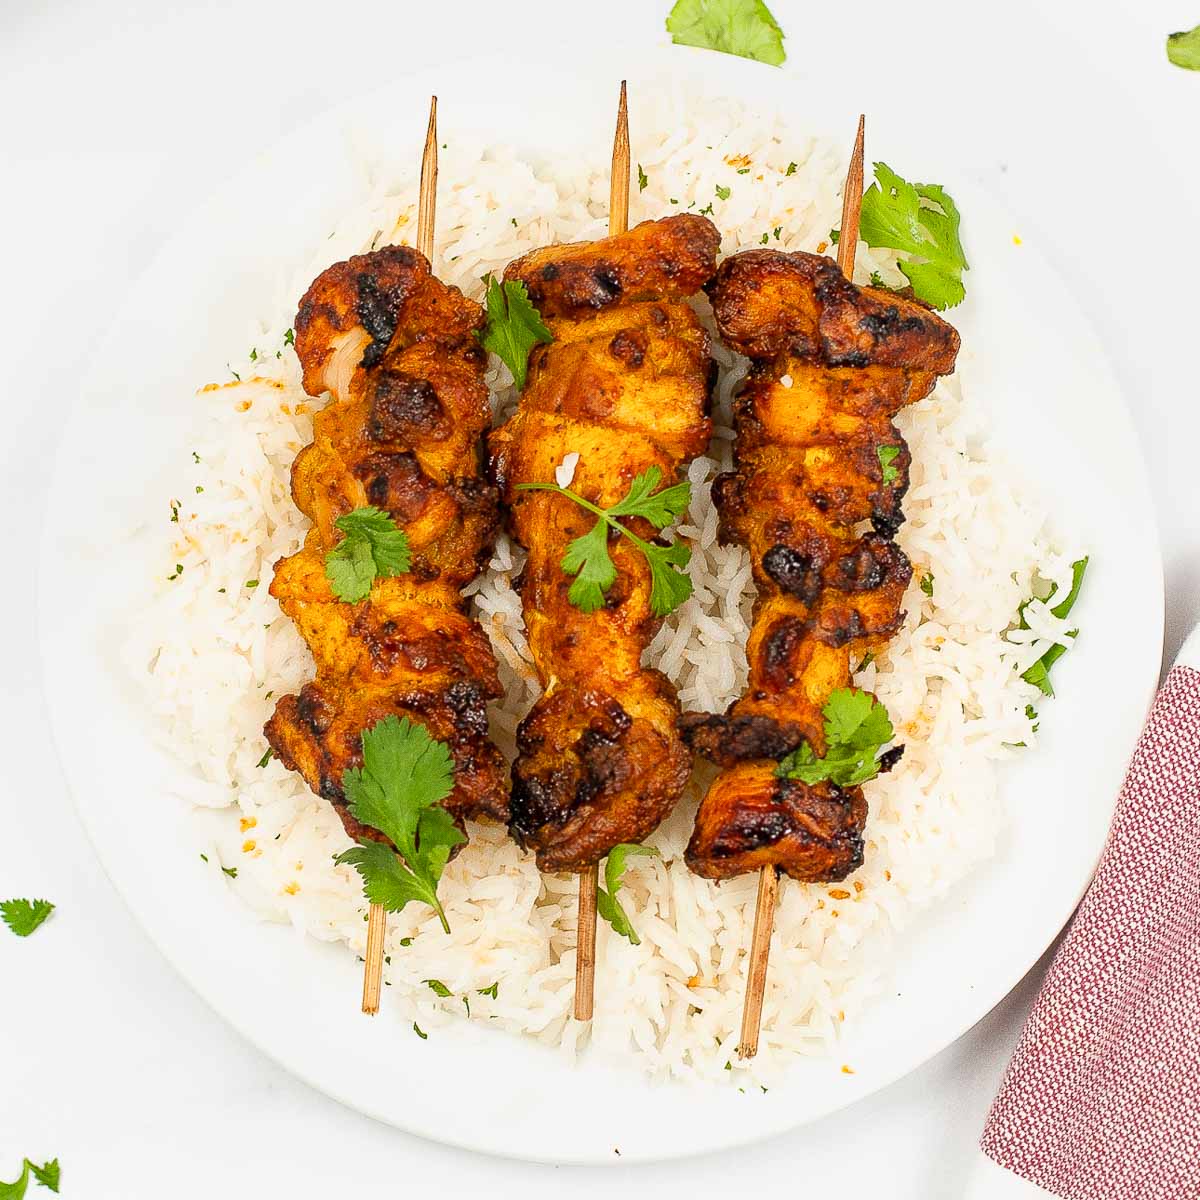 Plate of rice with tandoori chicken kebabs.